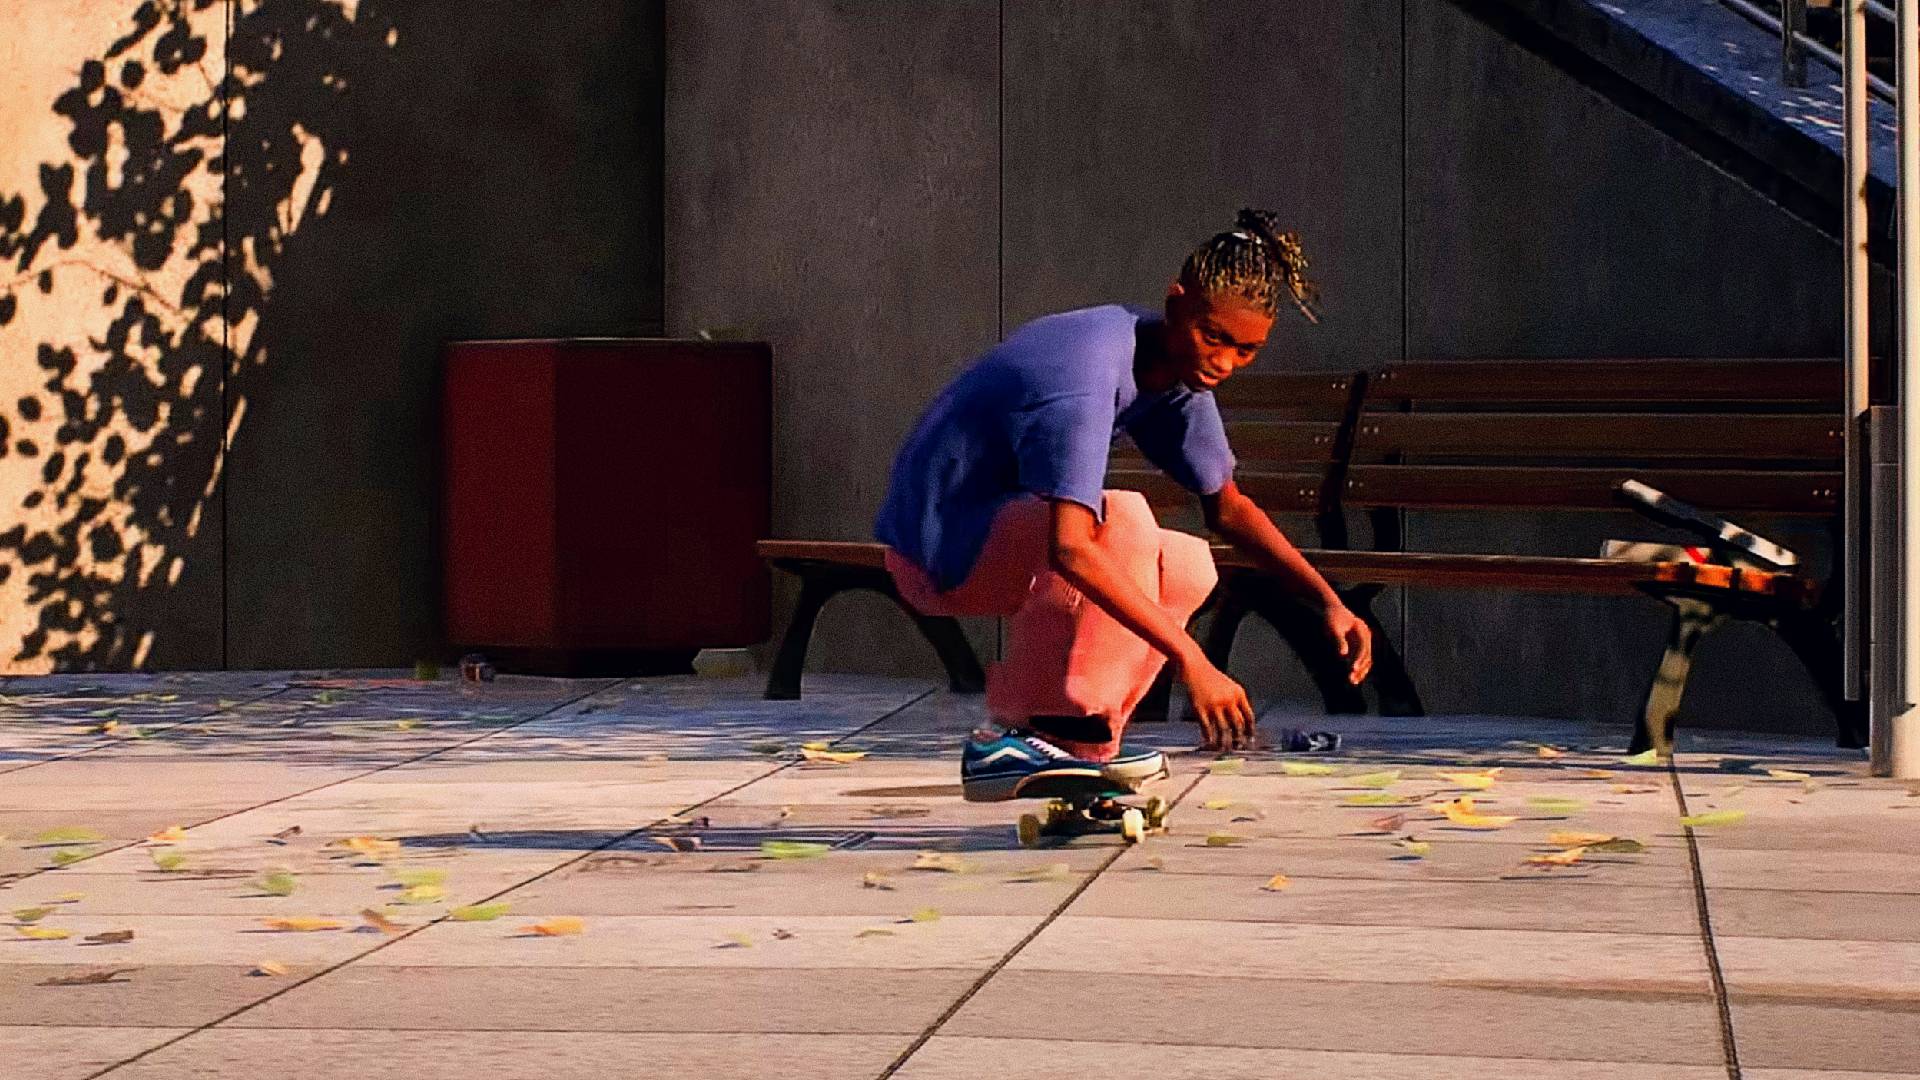 I love the way the Devs are doing this! #skate. #skate4gameplay #skate